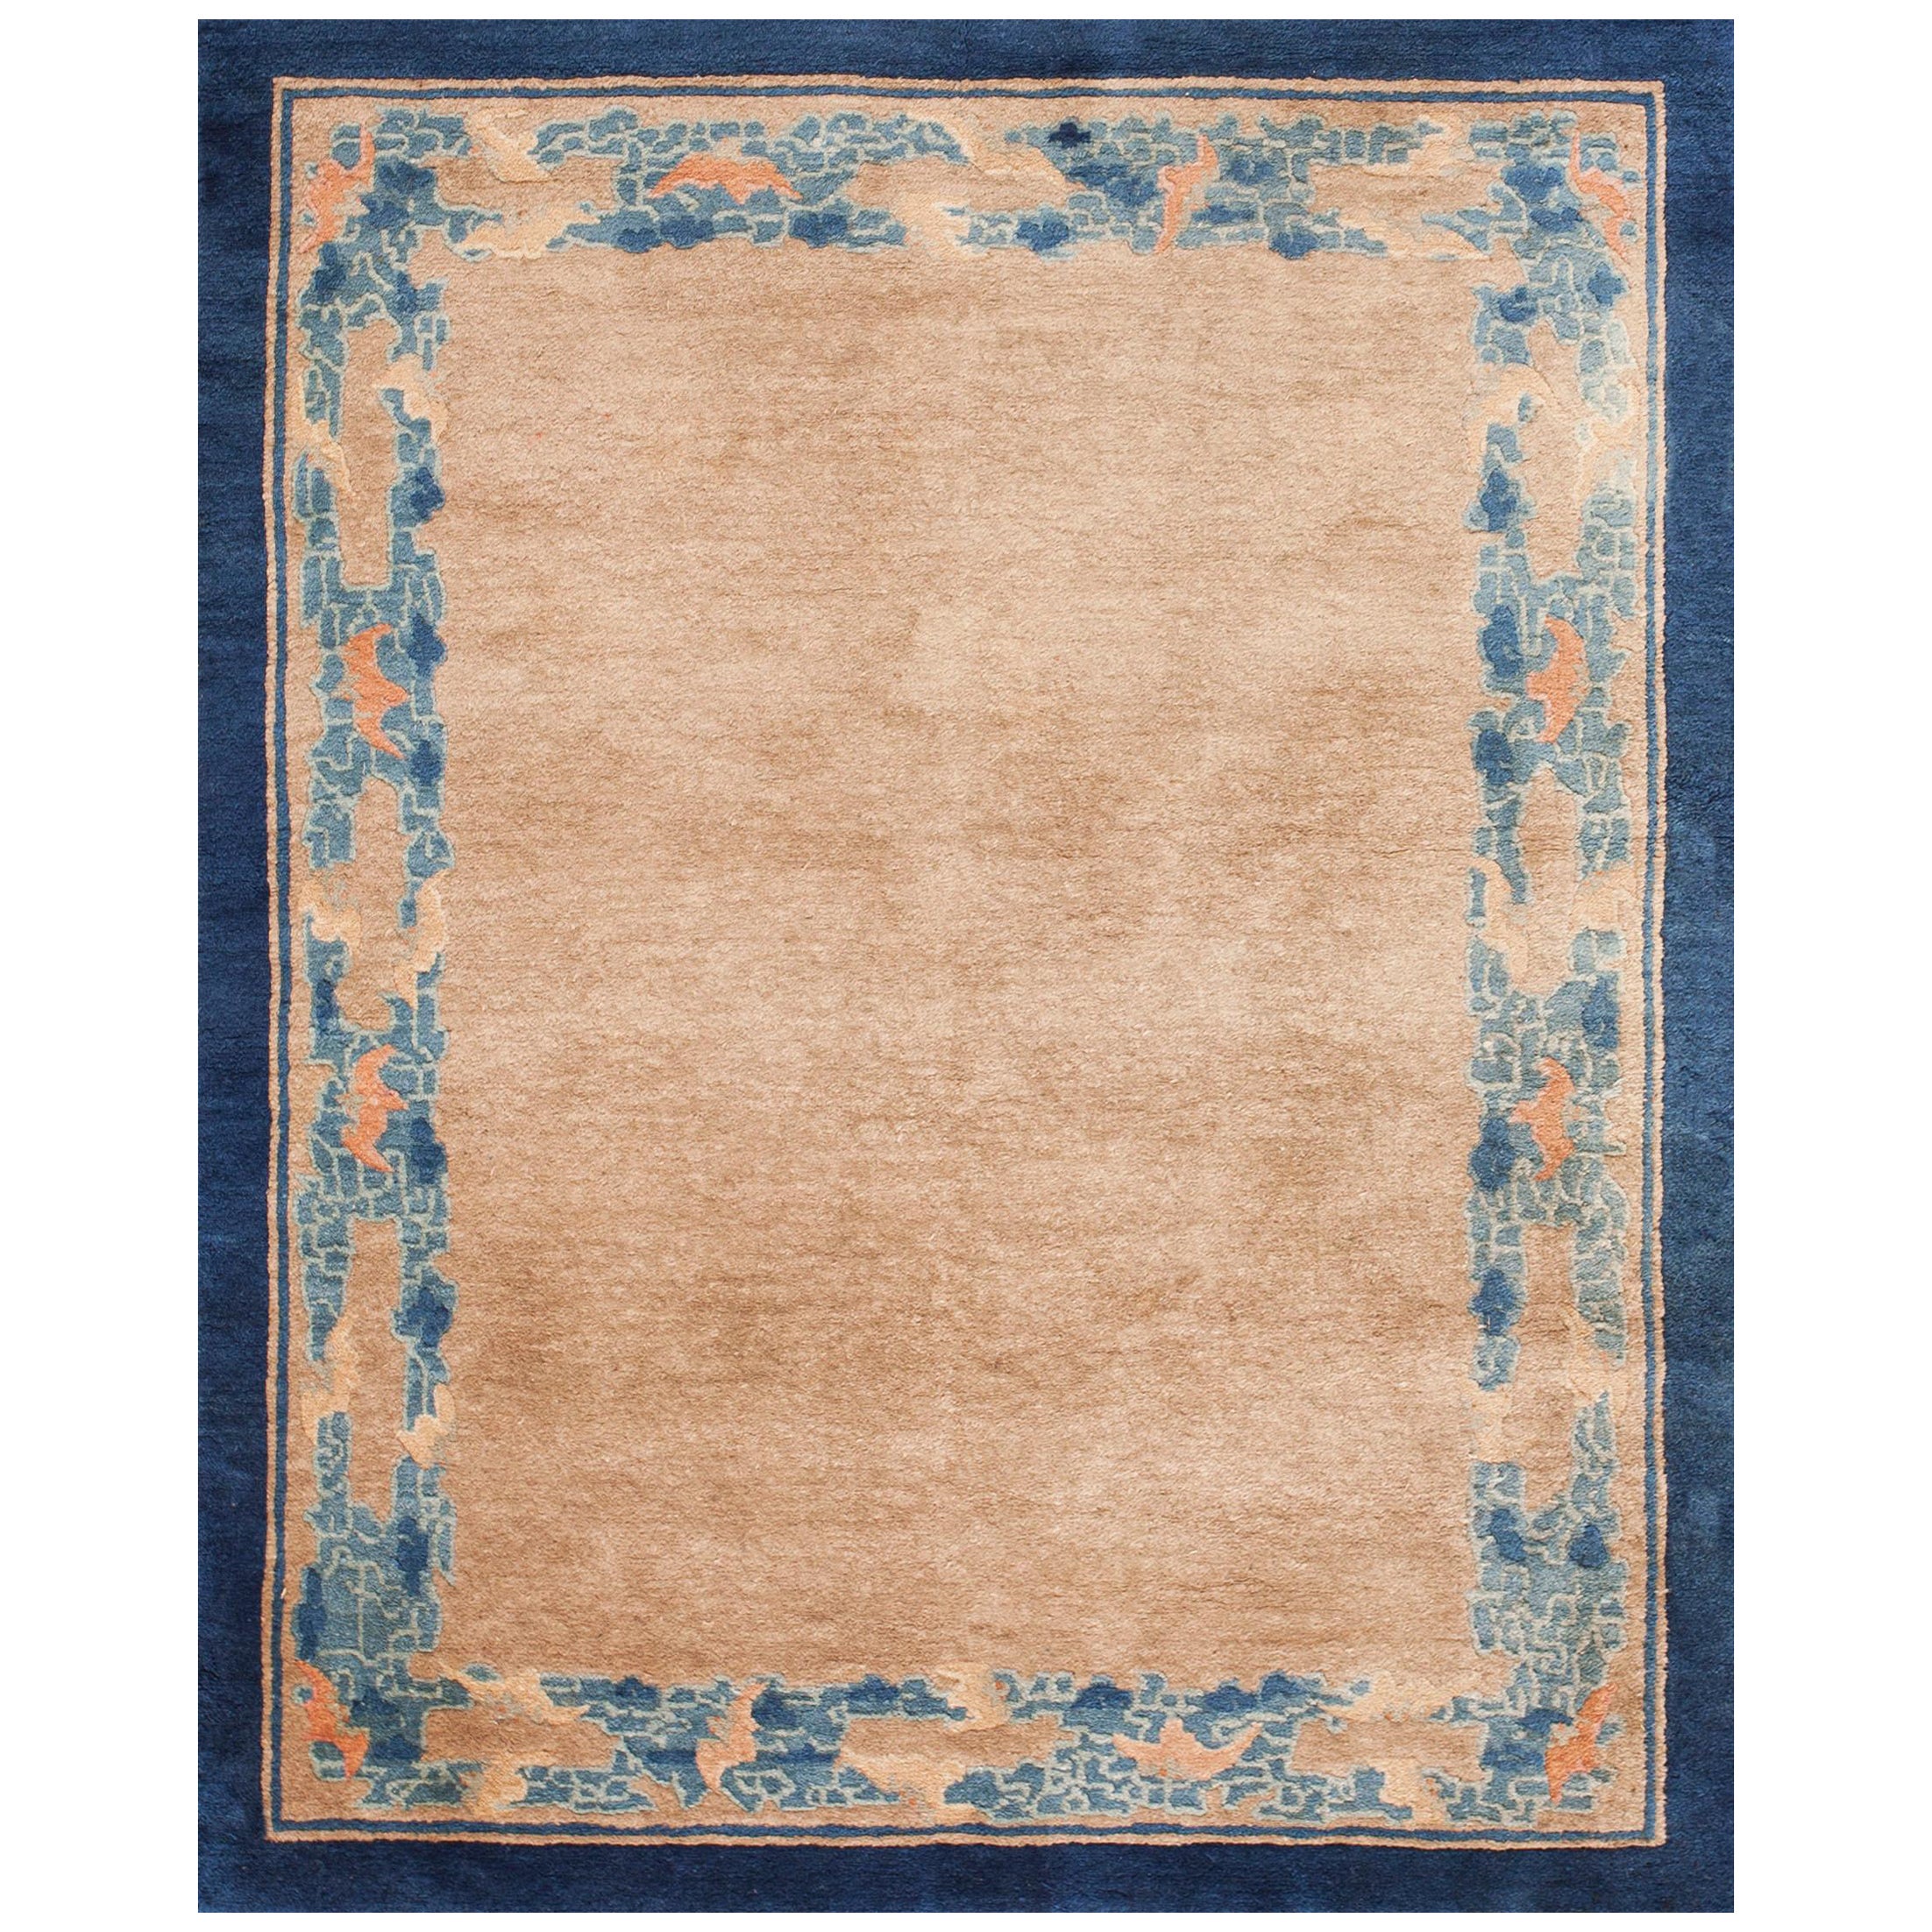 Early 20th Century Chinese Peking Carpet ( 4' x 5' - 122 x 152 ) For Sale